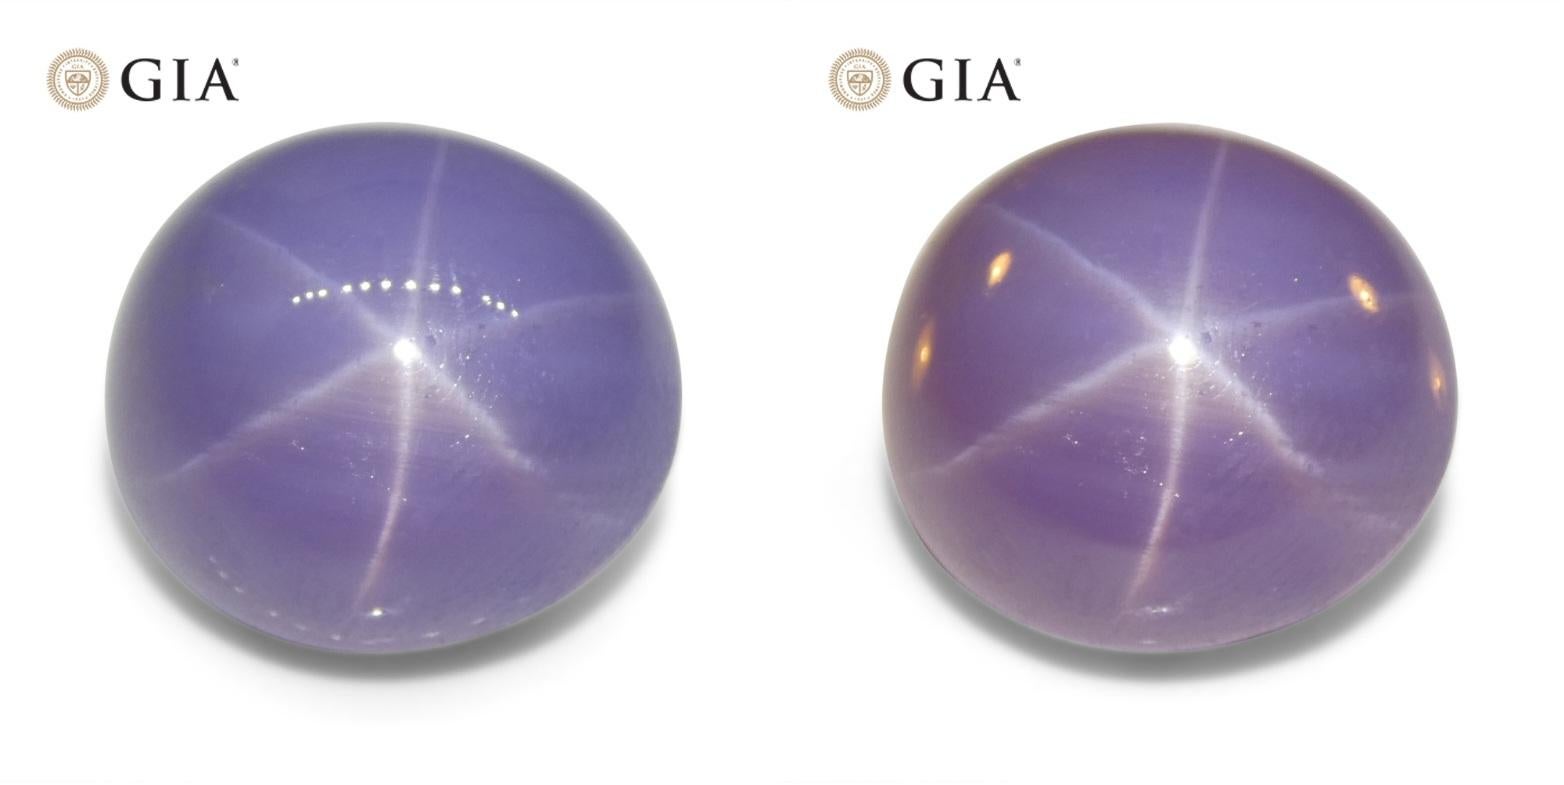 This is a stunning GIA Certified Star Sapphire

The GIA report reads as follows:

GIA Report Number: 2233023940
Shape: Oval
Cutting Style: Double Cabochon
Cutting Style: Crown: 
Cutting Style: Pavilion: 
Transparency: Translucent
Colour: Violetish